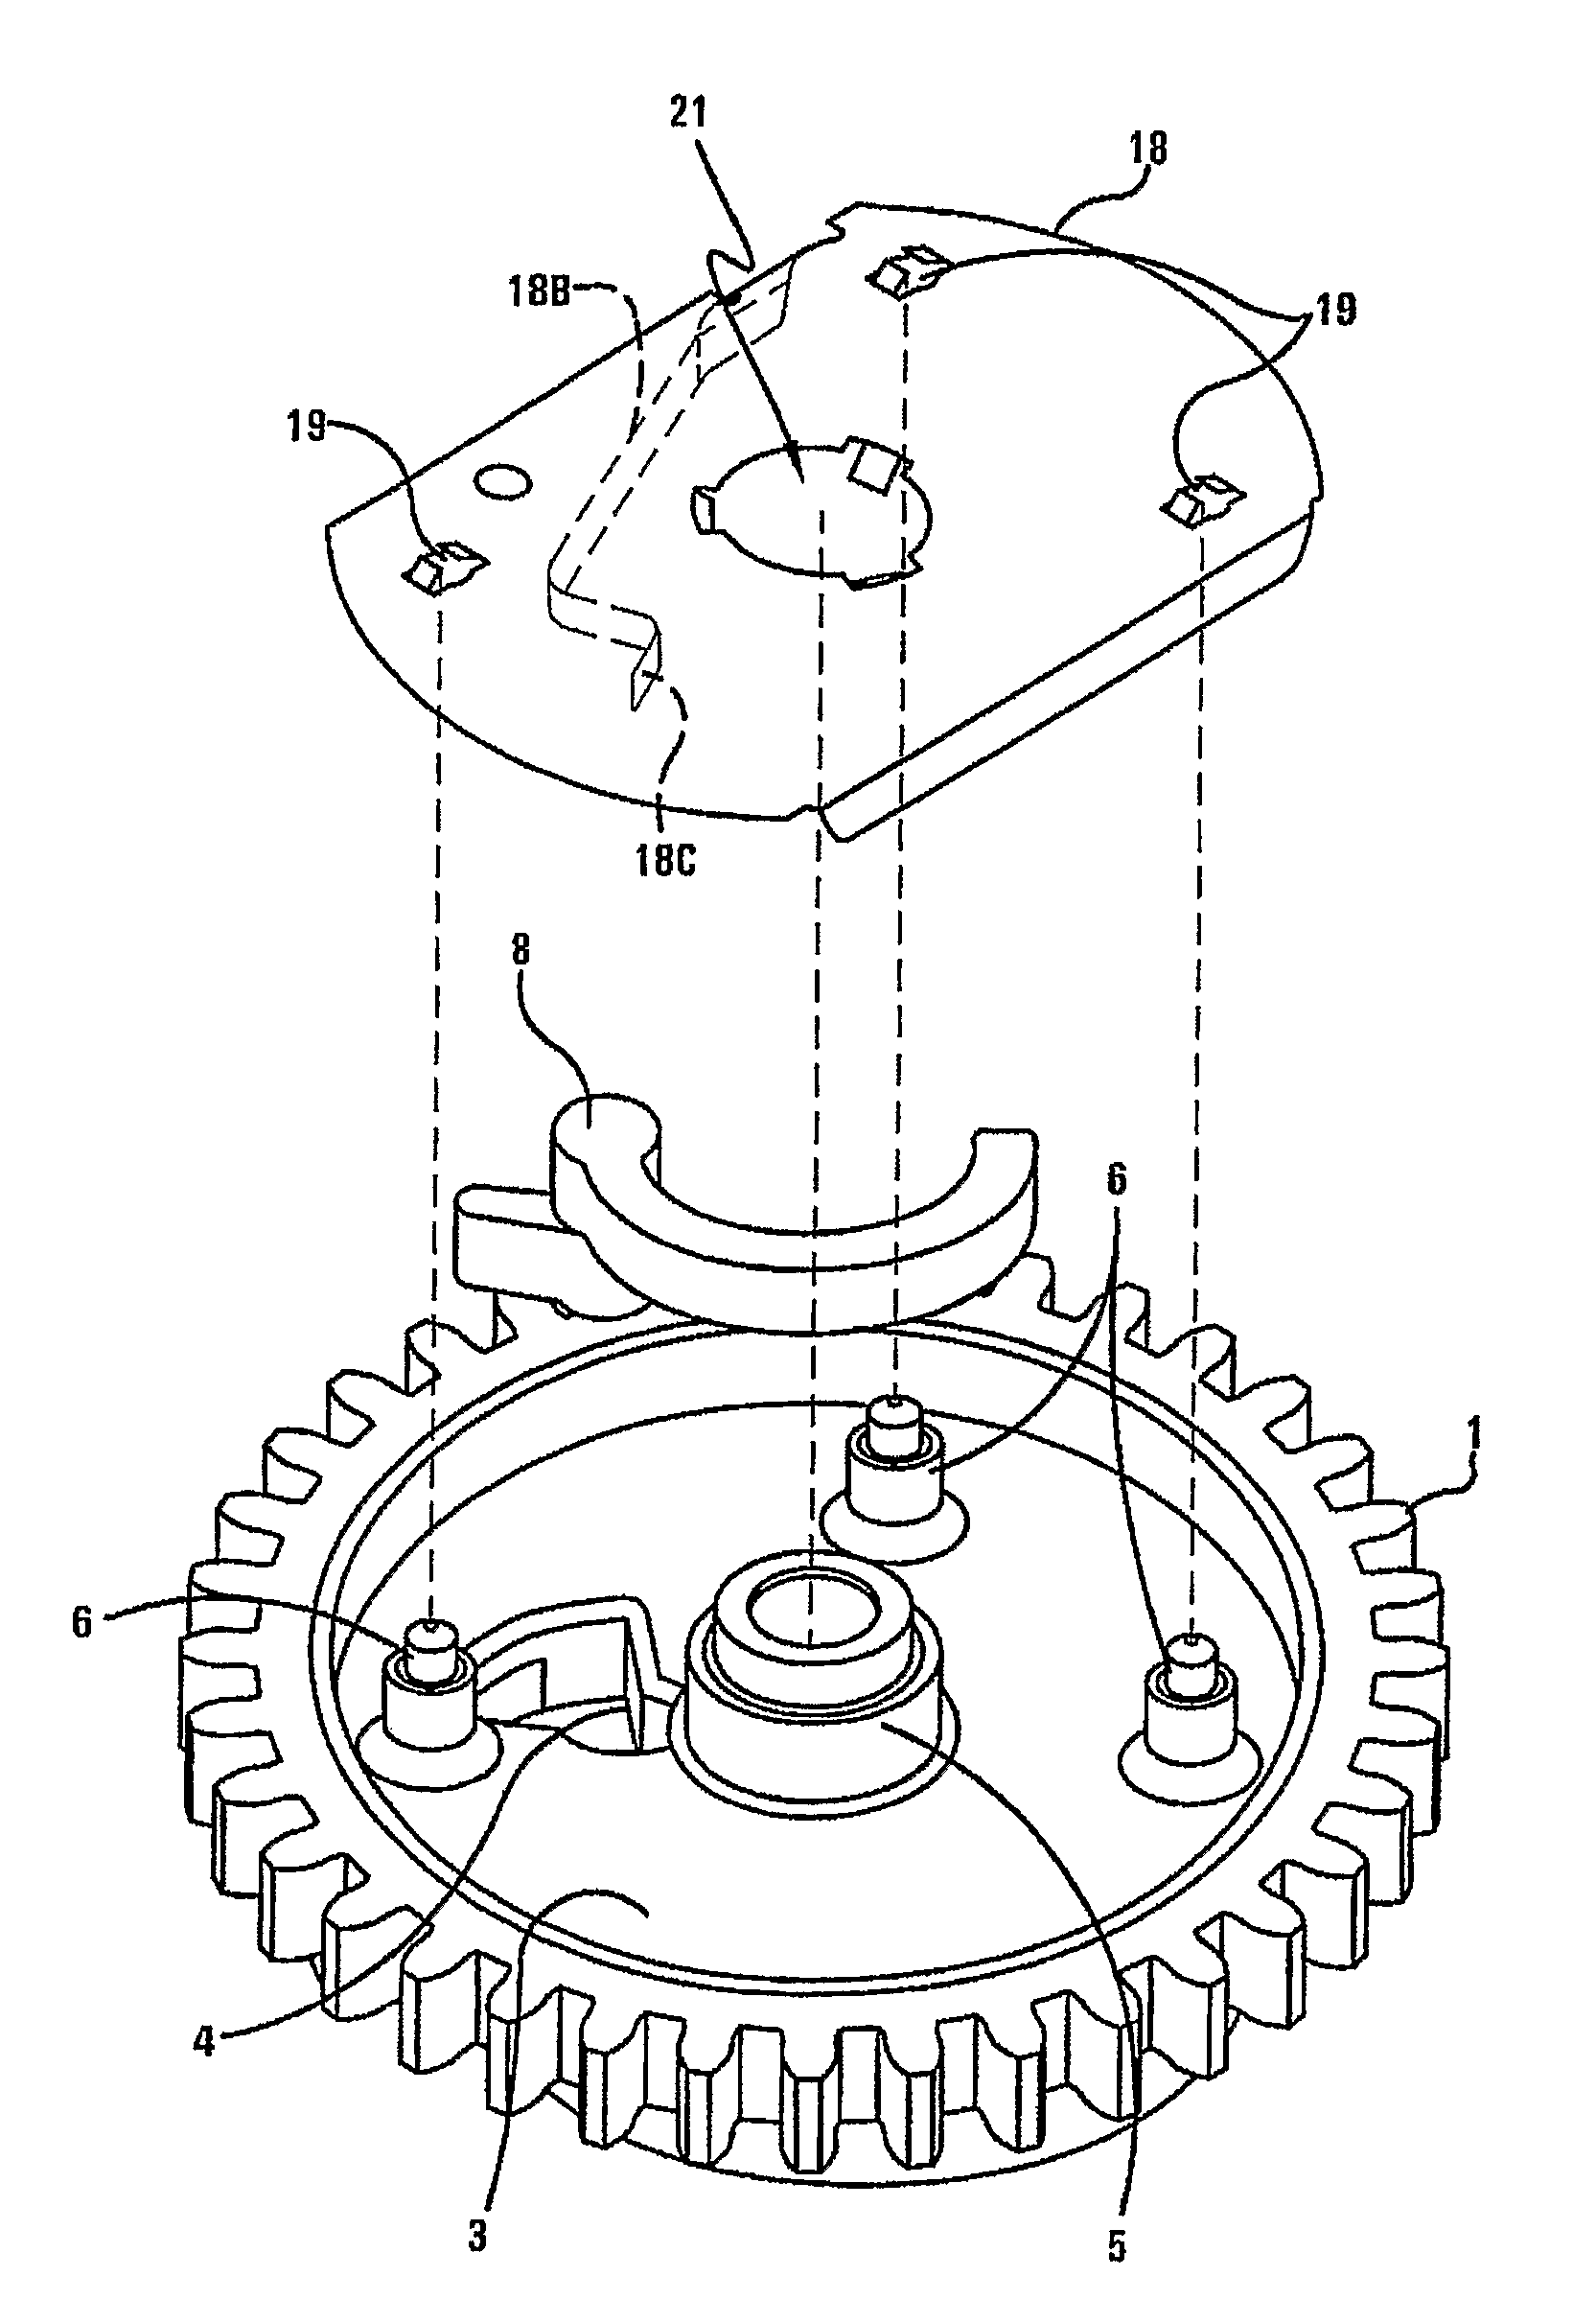 Automatic decompression mechanism for an engine